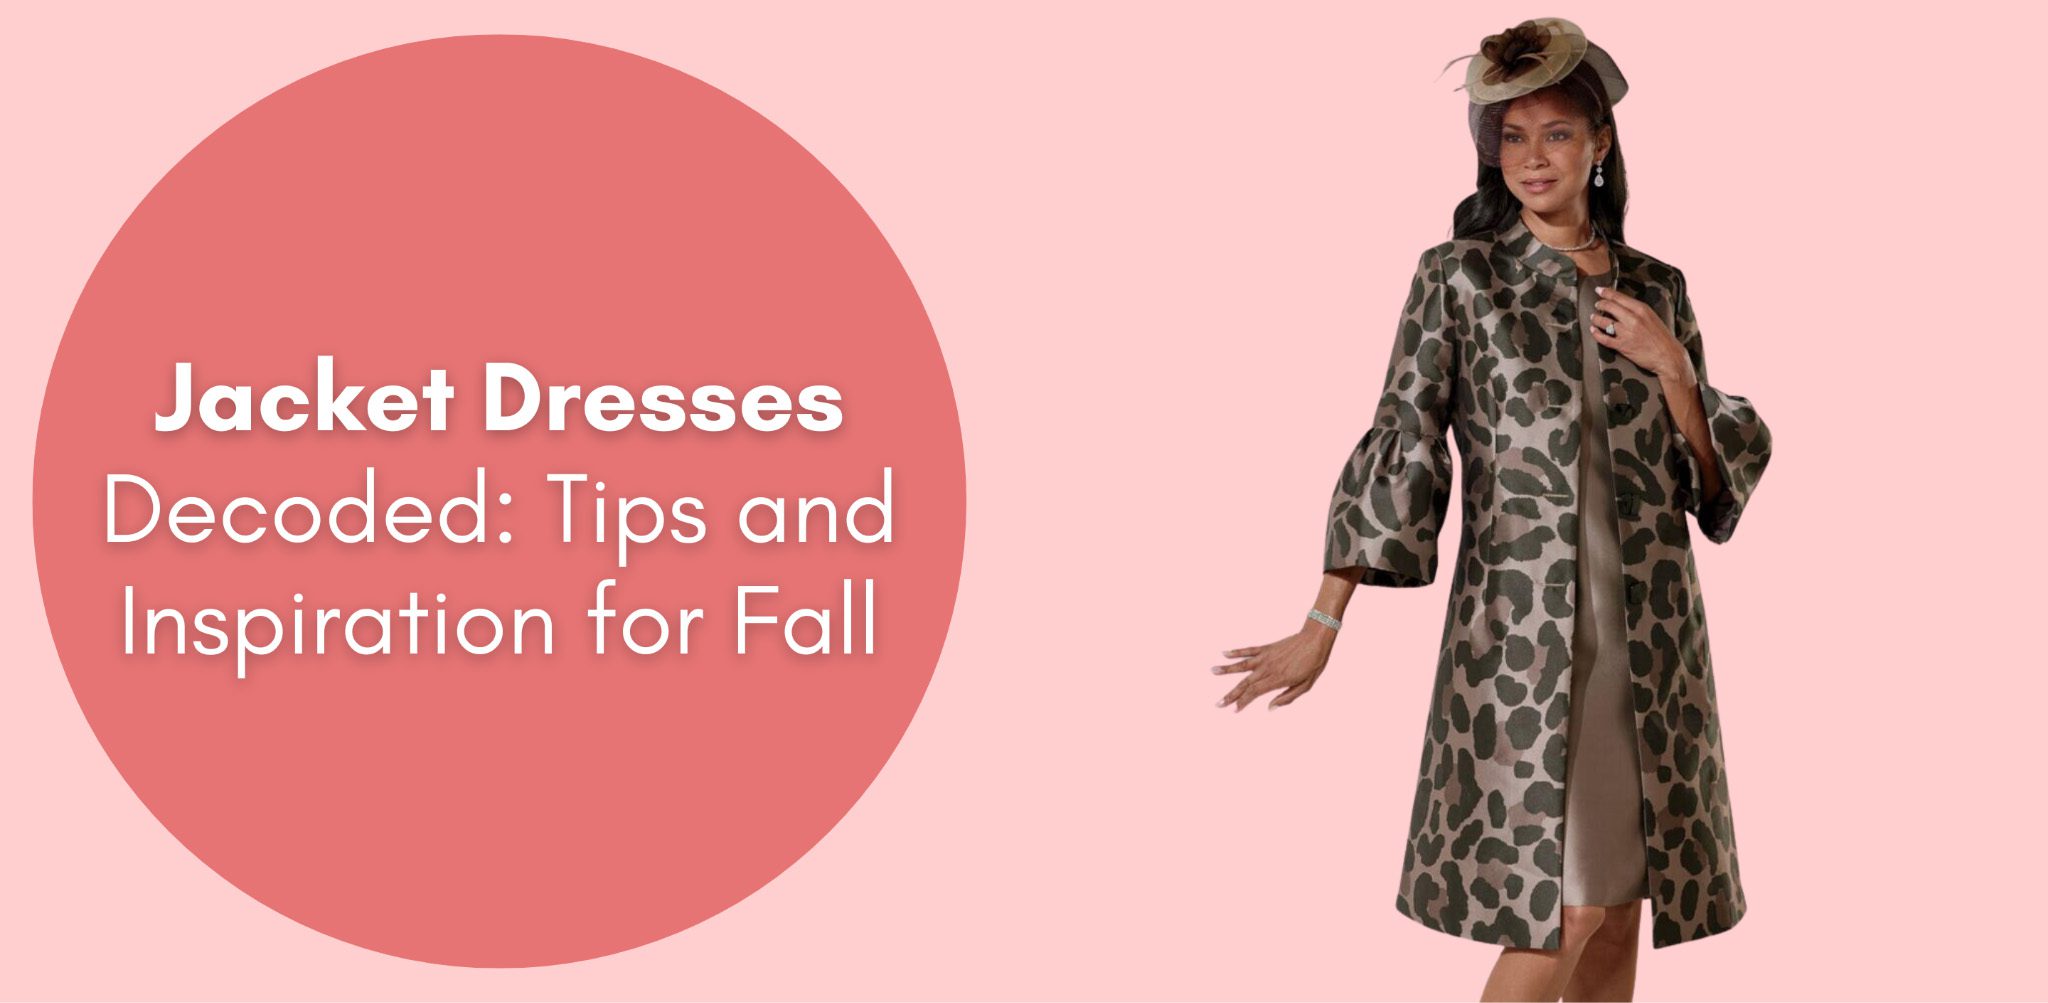 Jacket Dresses Decoded: Tips and Inspiration for Fall